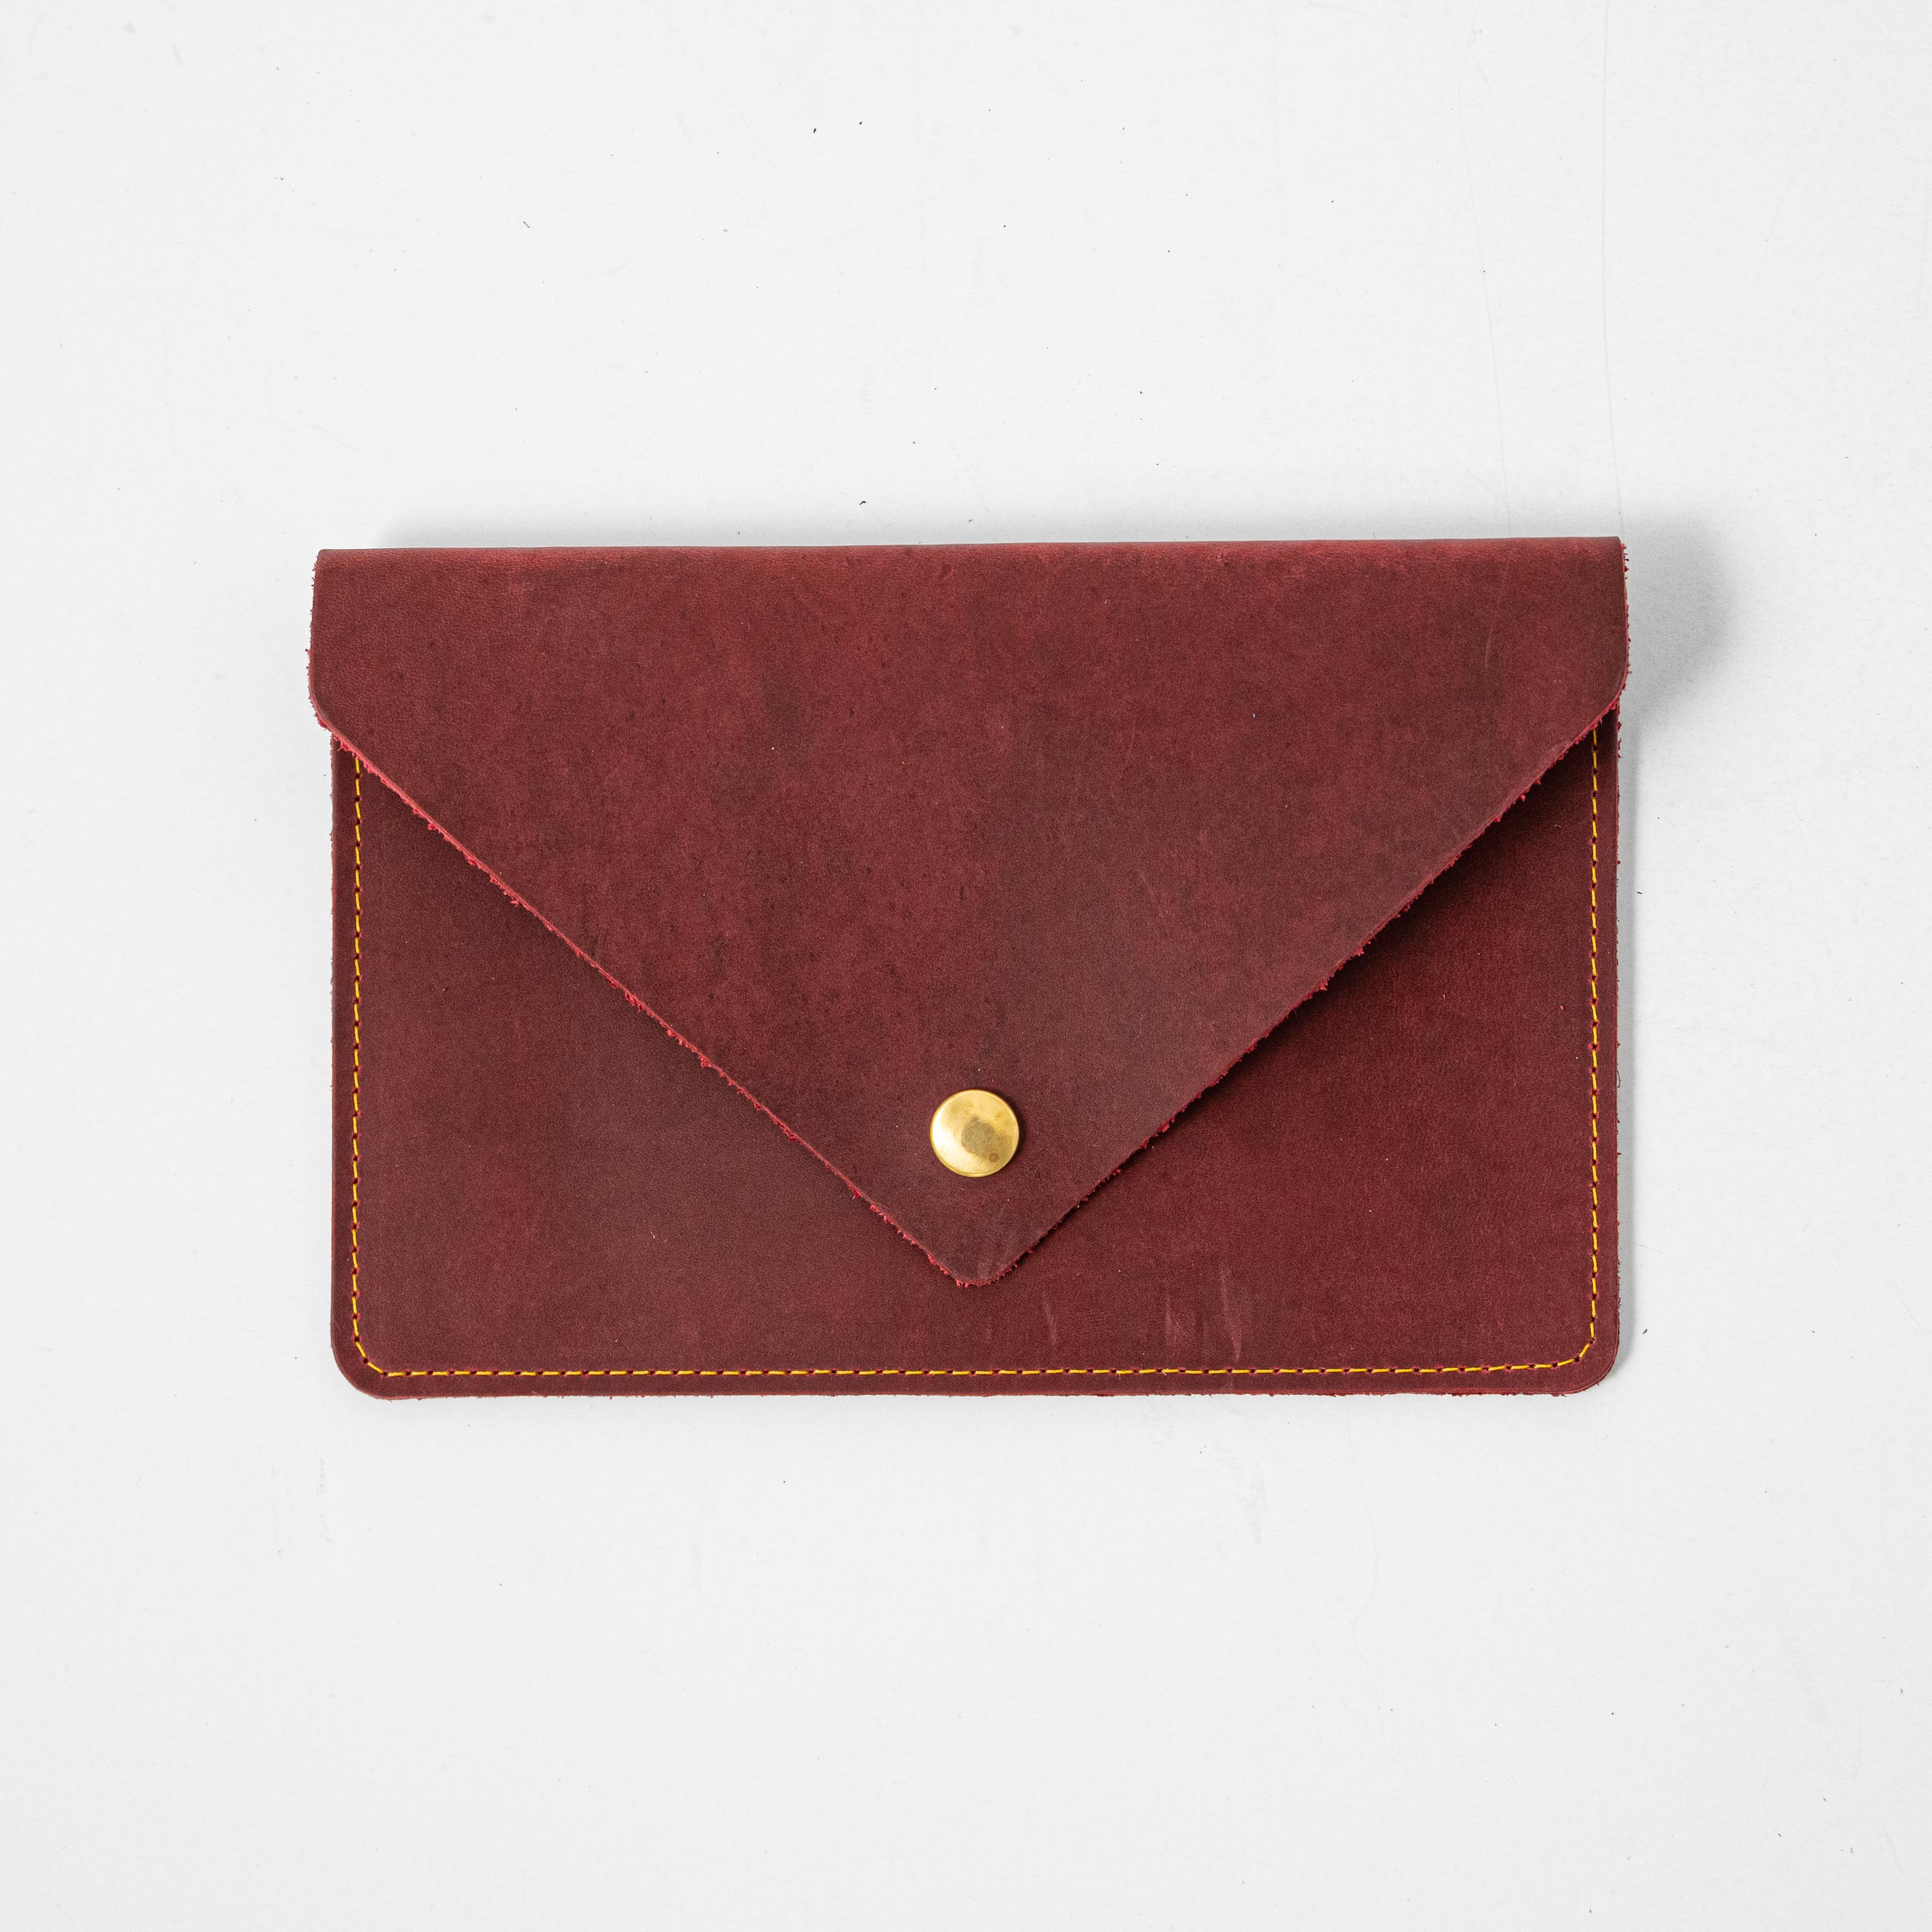 Cranberry Crazy Horse Leather Clutch